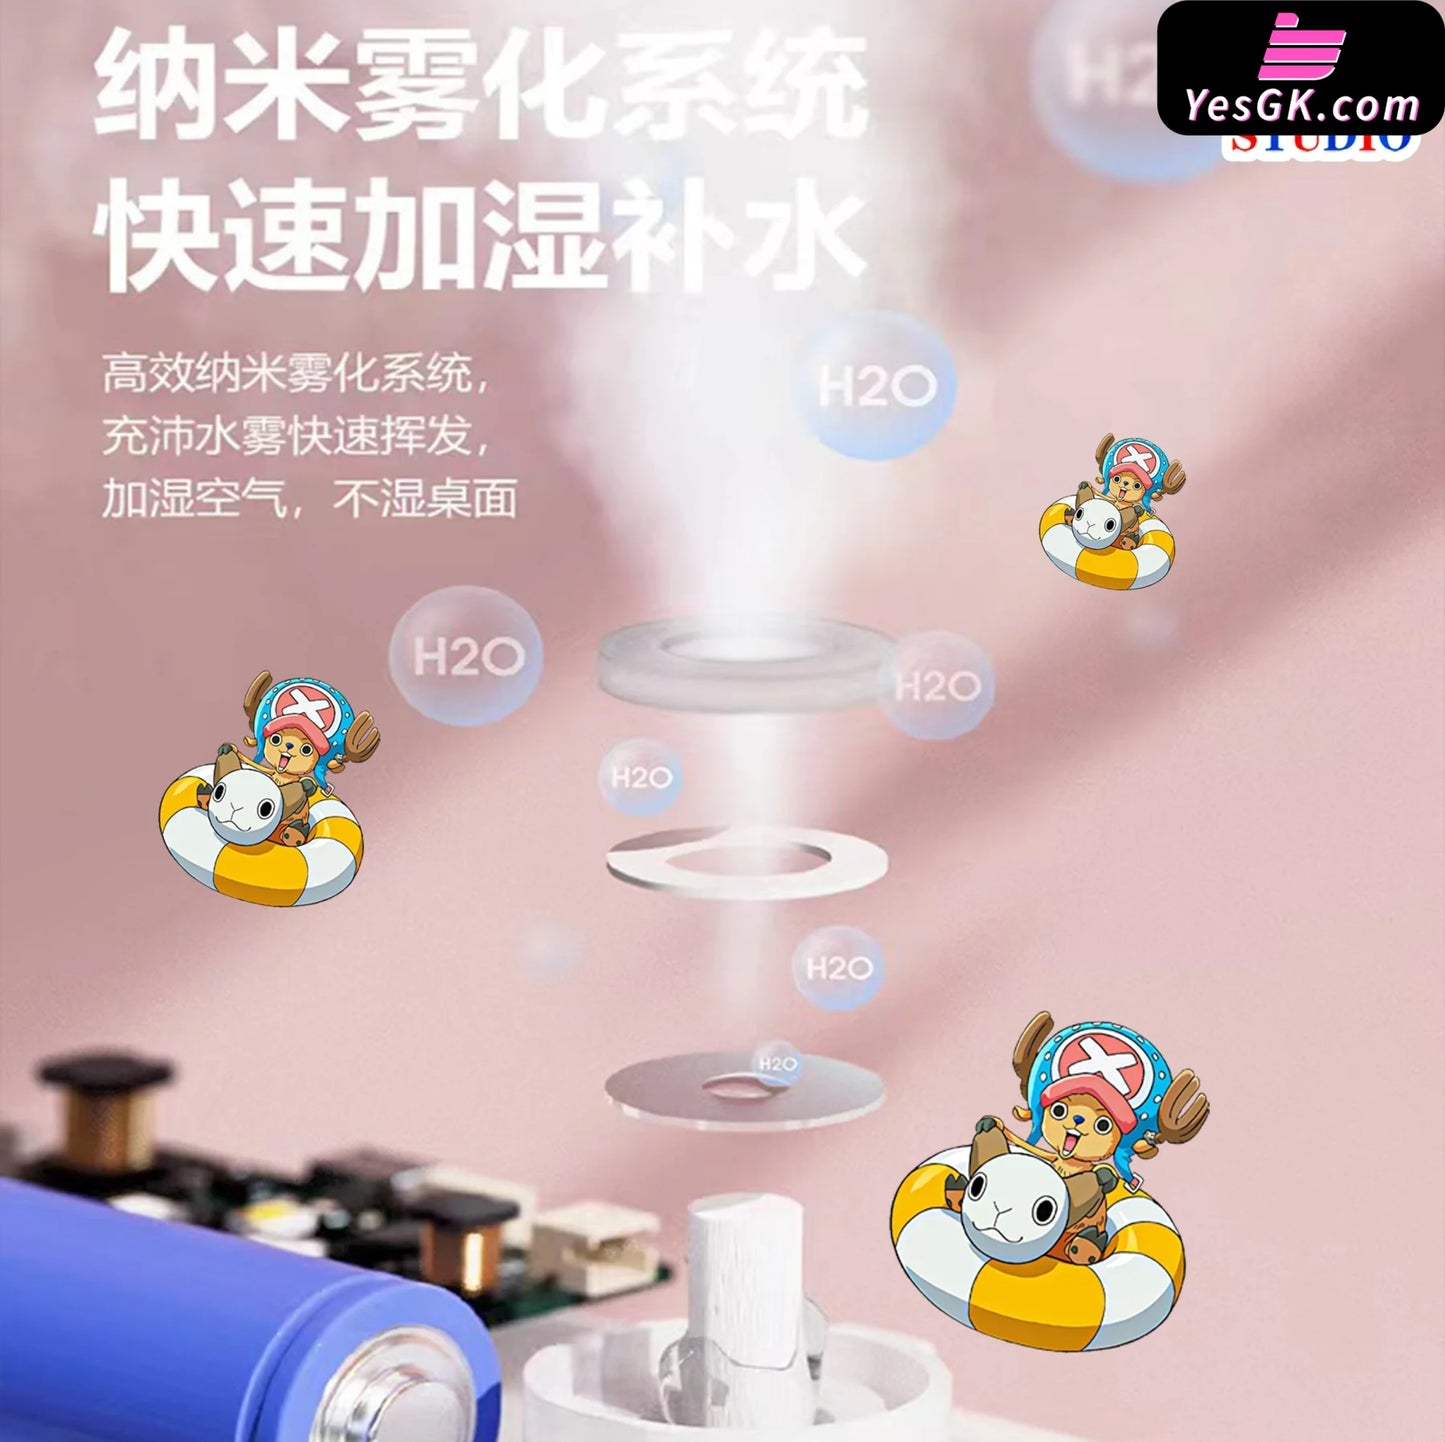 Chopper Air Humidifier And Night Light Resin Statue - Psd Studio [Pre-Order]